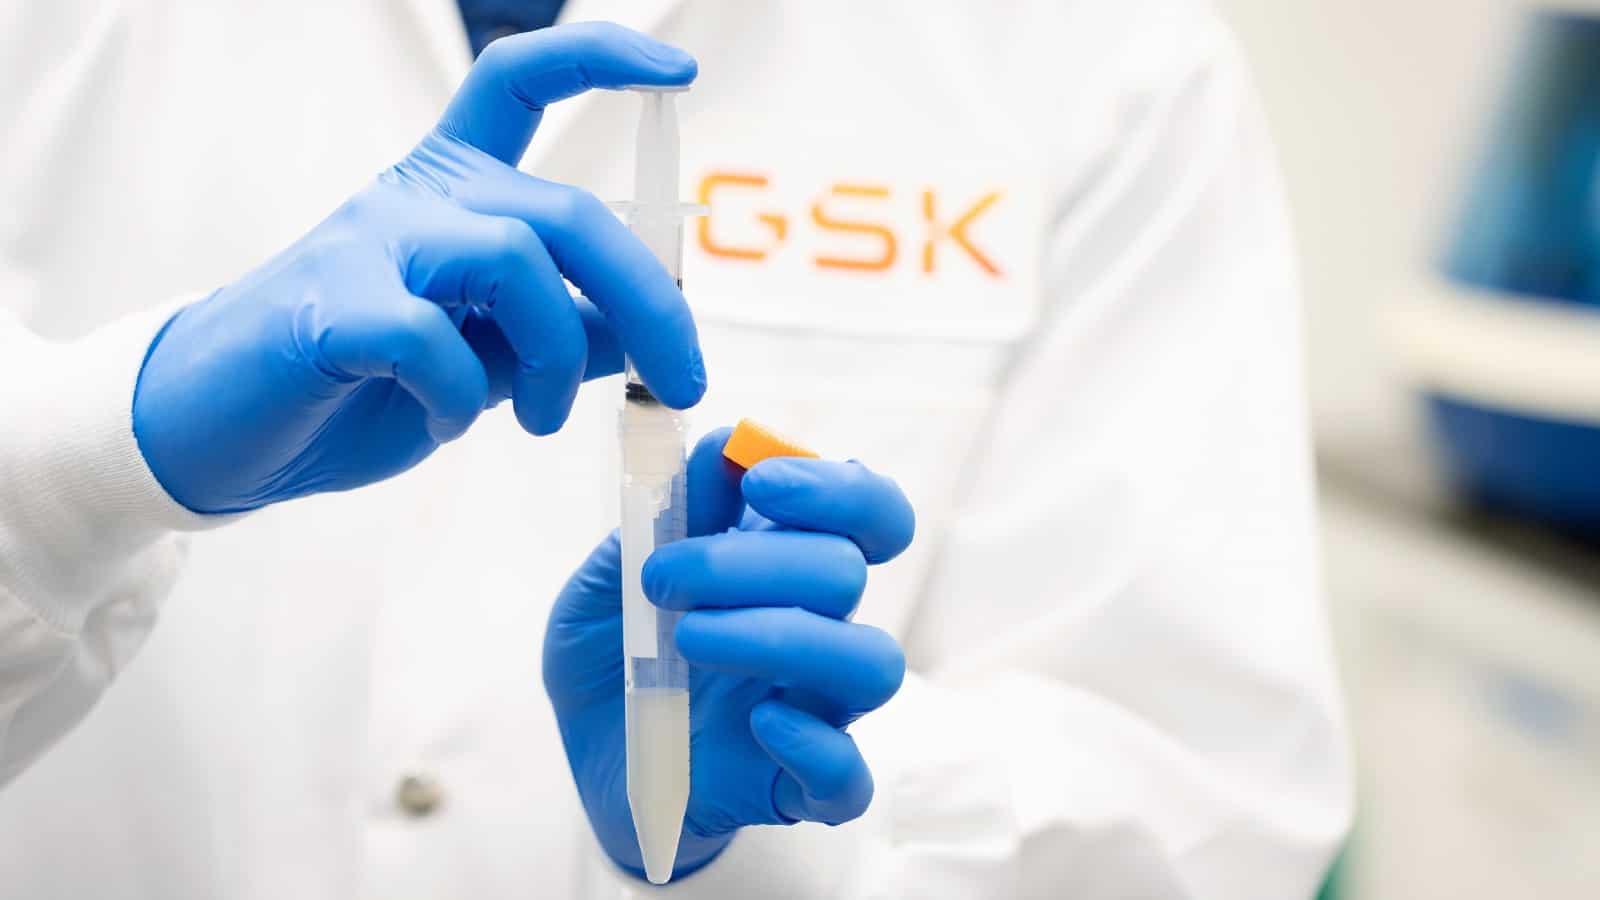 despite being around an 18-month high, gsk’s share price looks cheap to me